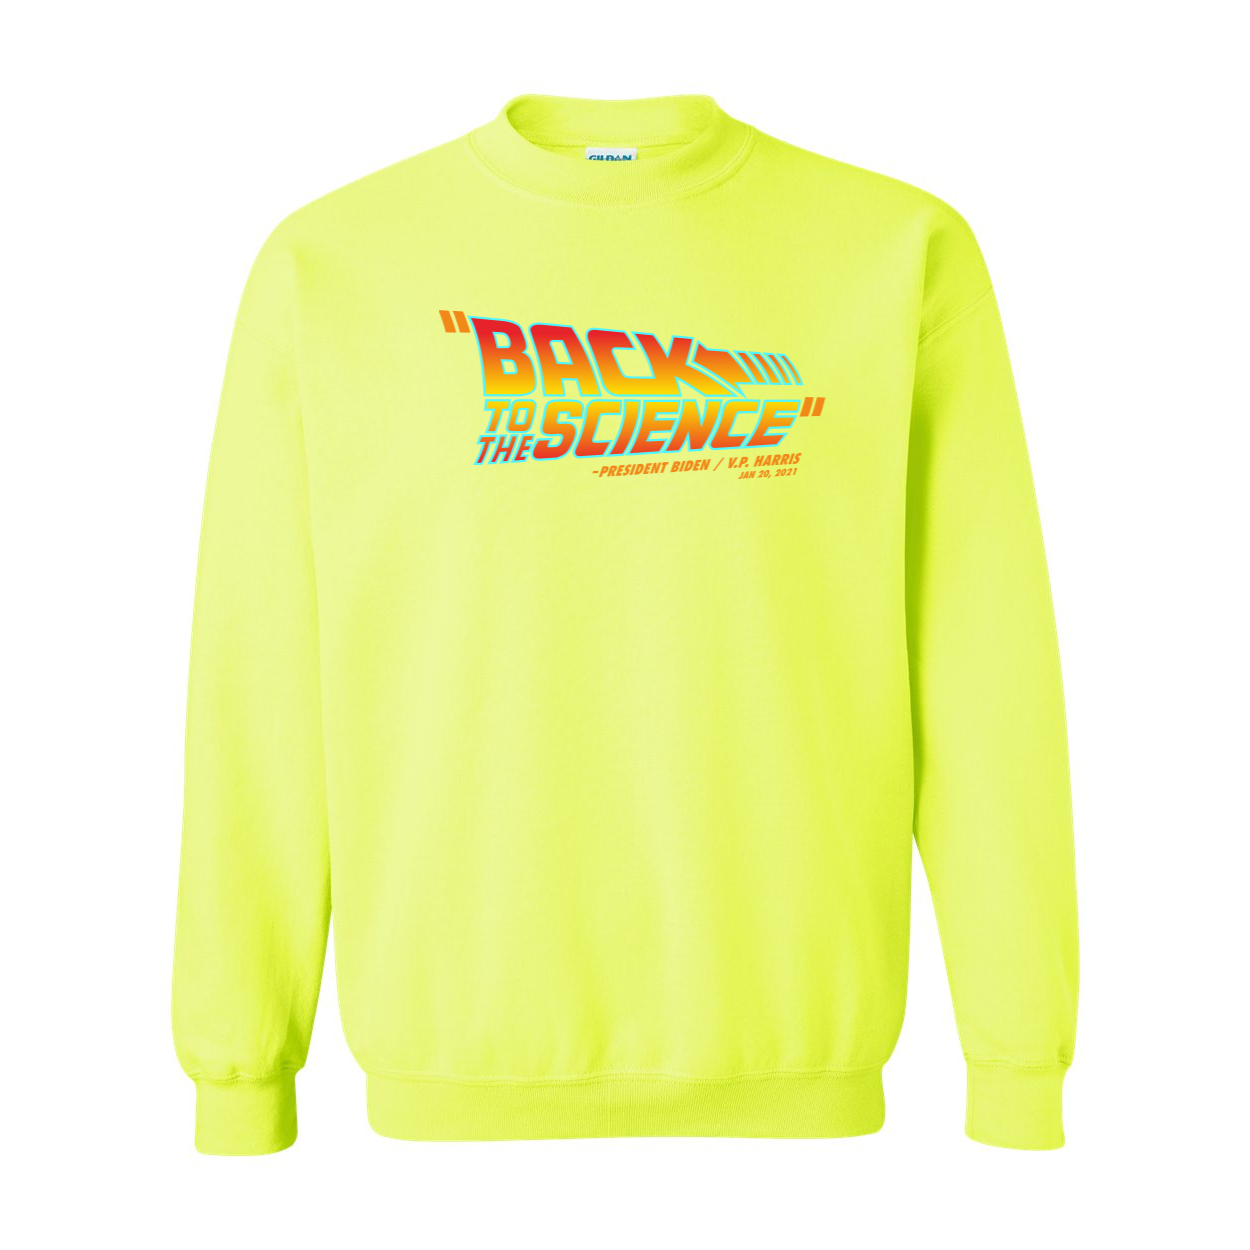 Back To The Science Sweatshirt